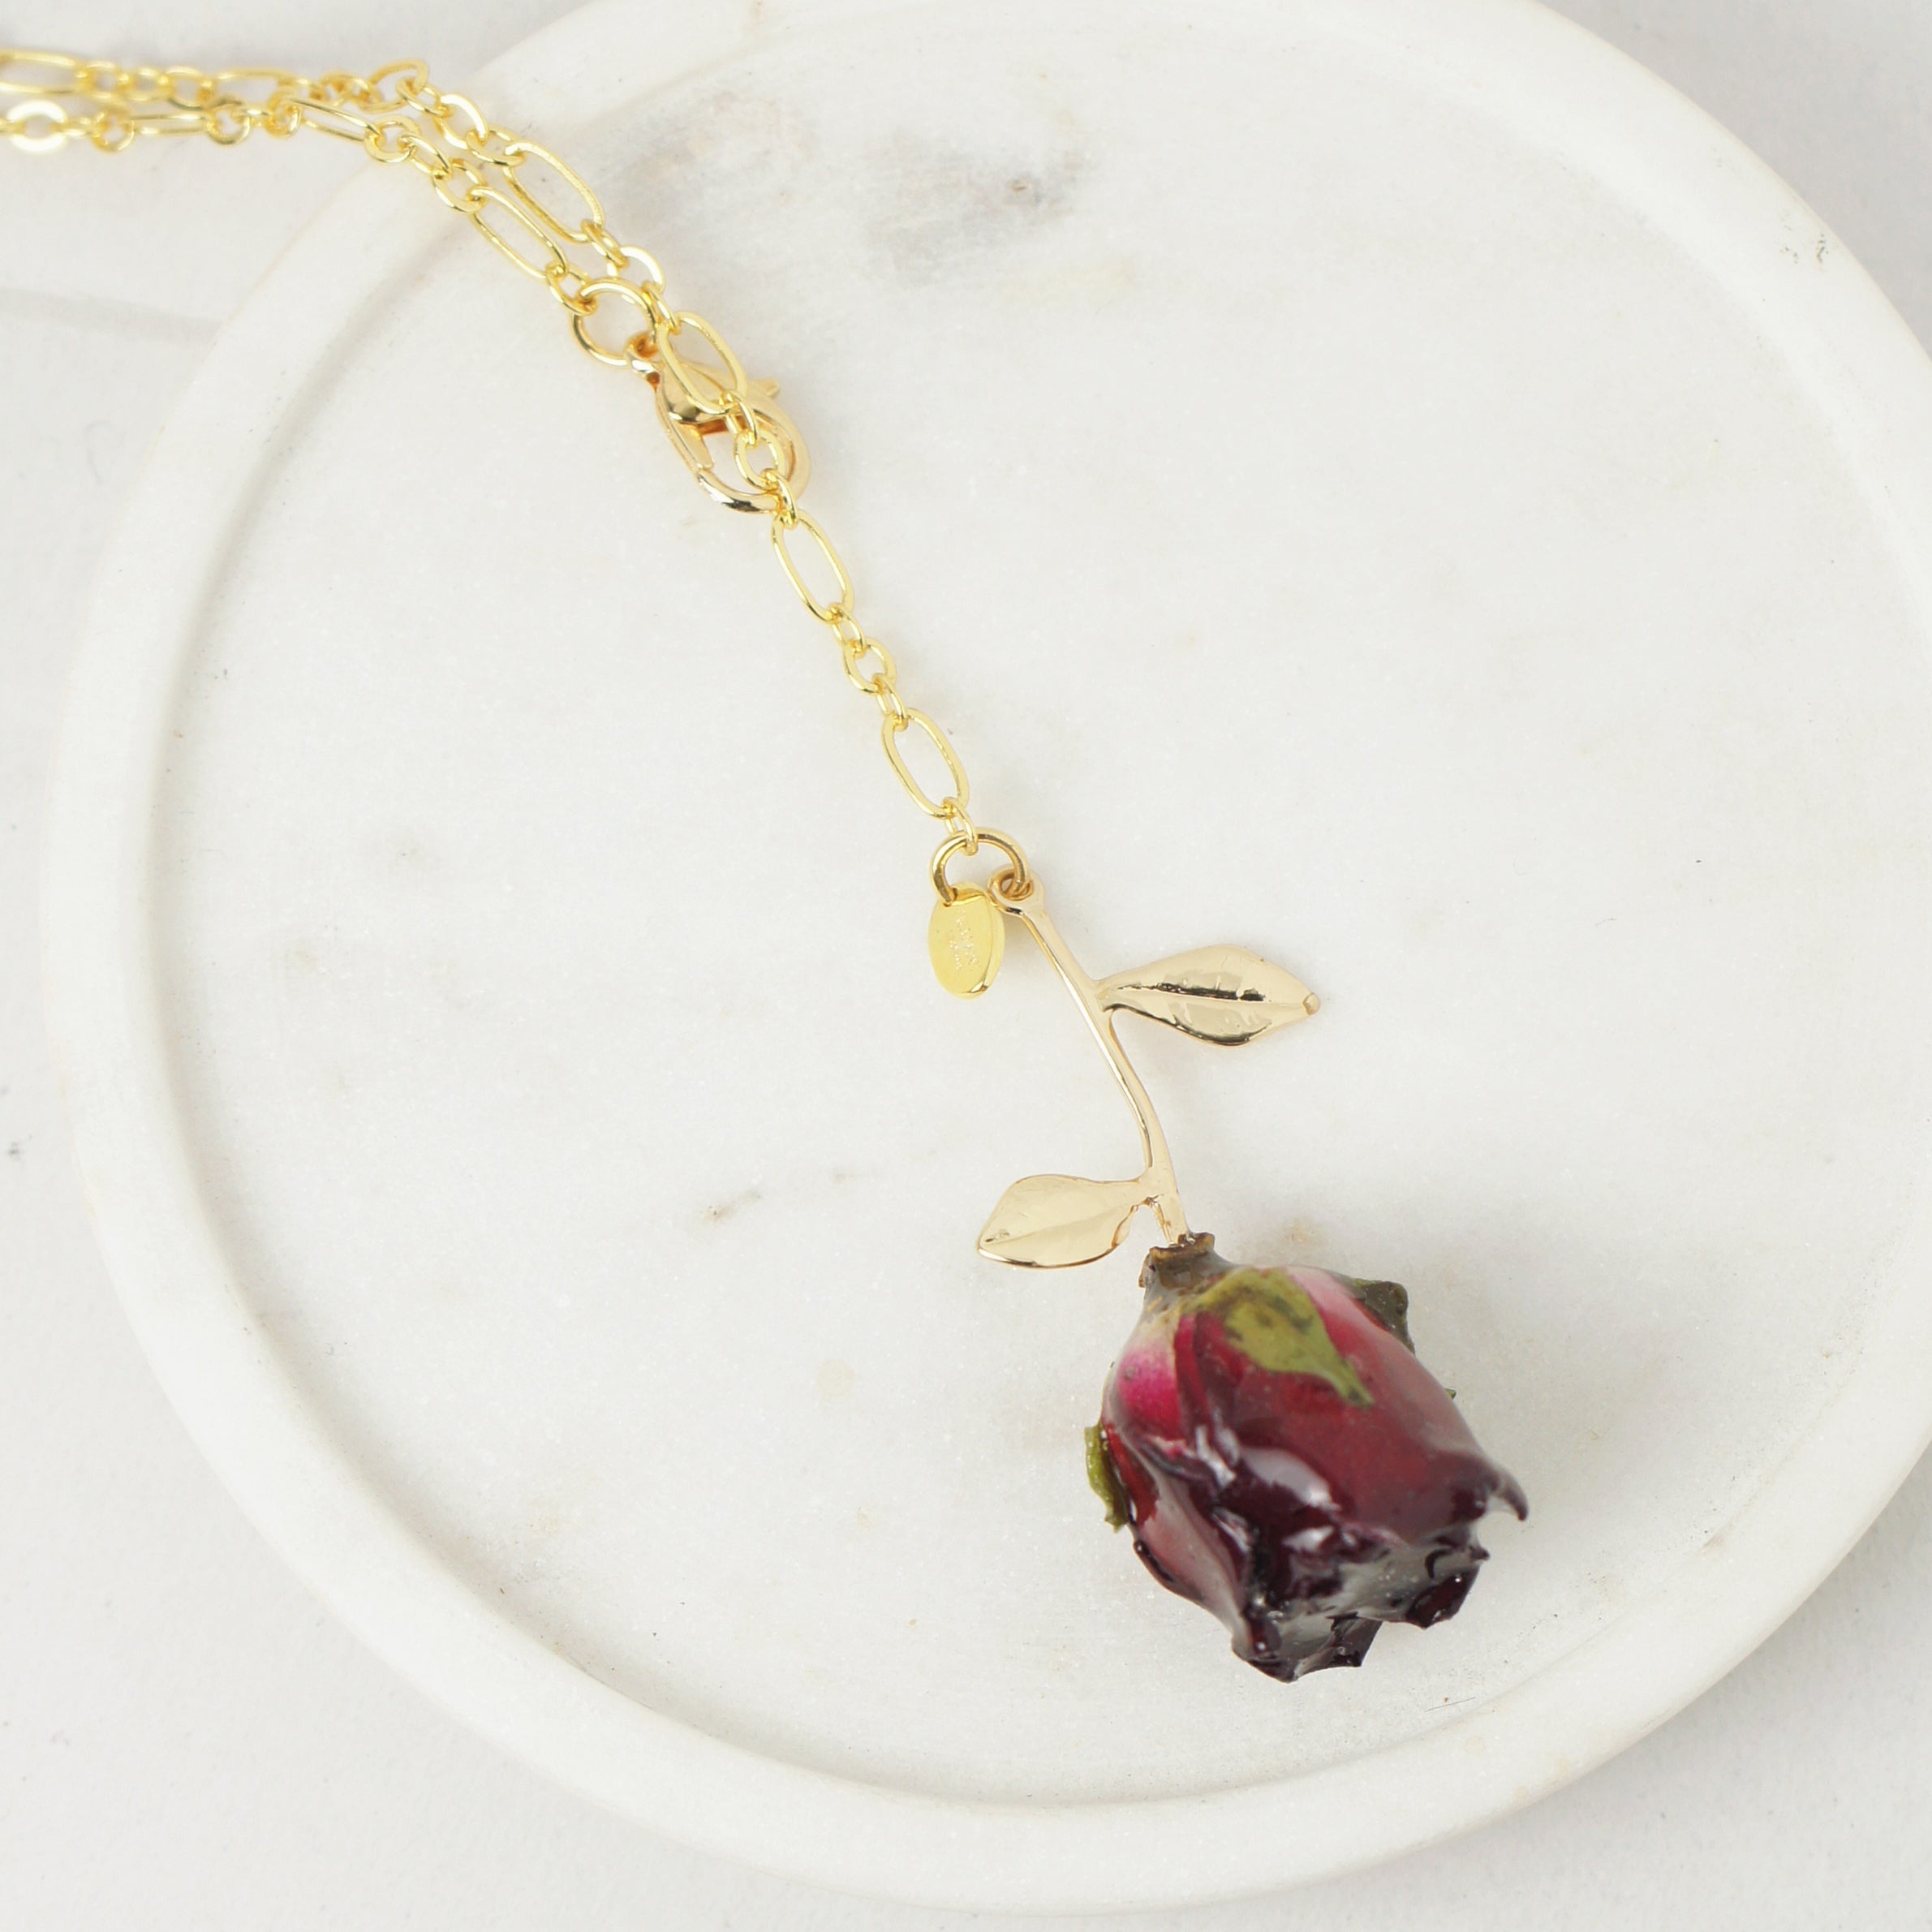 *REAL FLOWER* Grande Amore Rosebud with Stem Chain Necklace